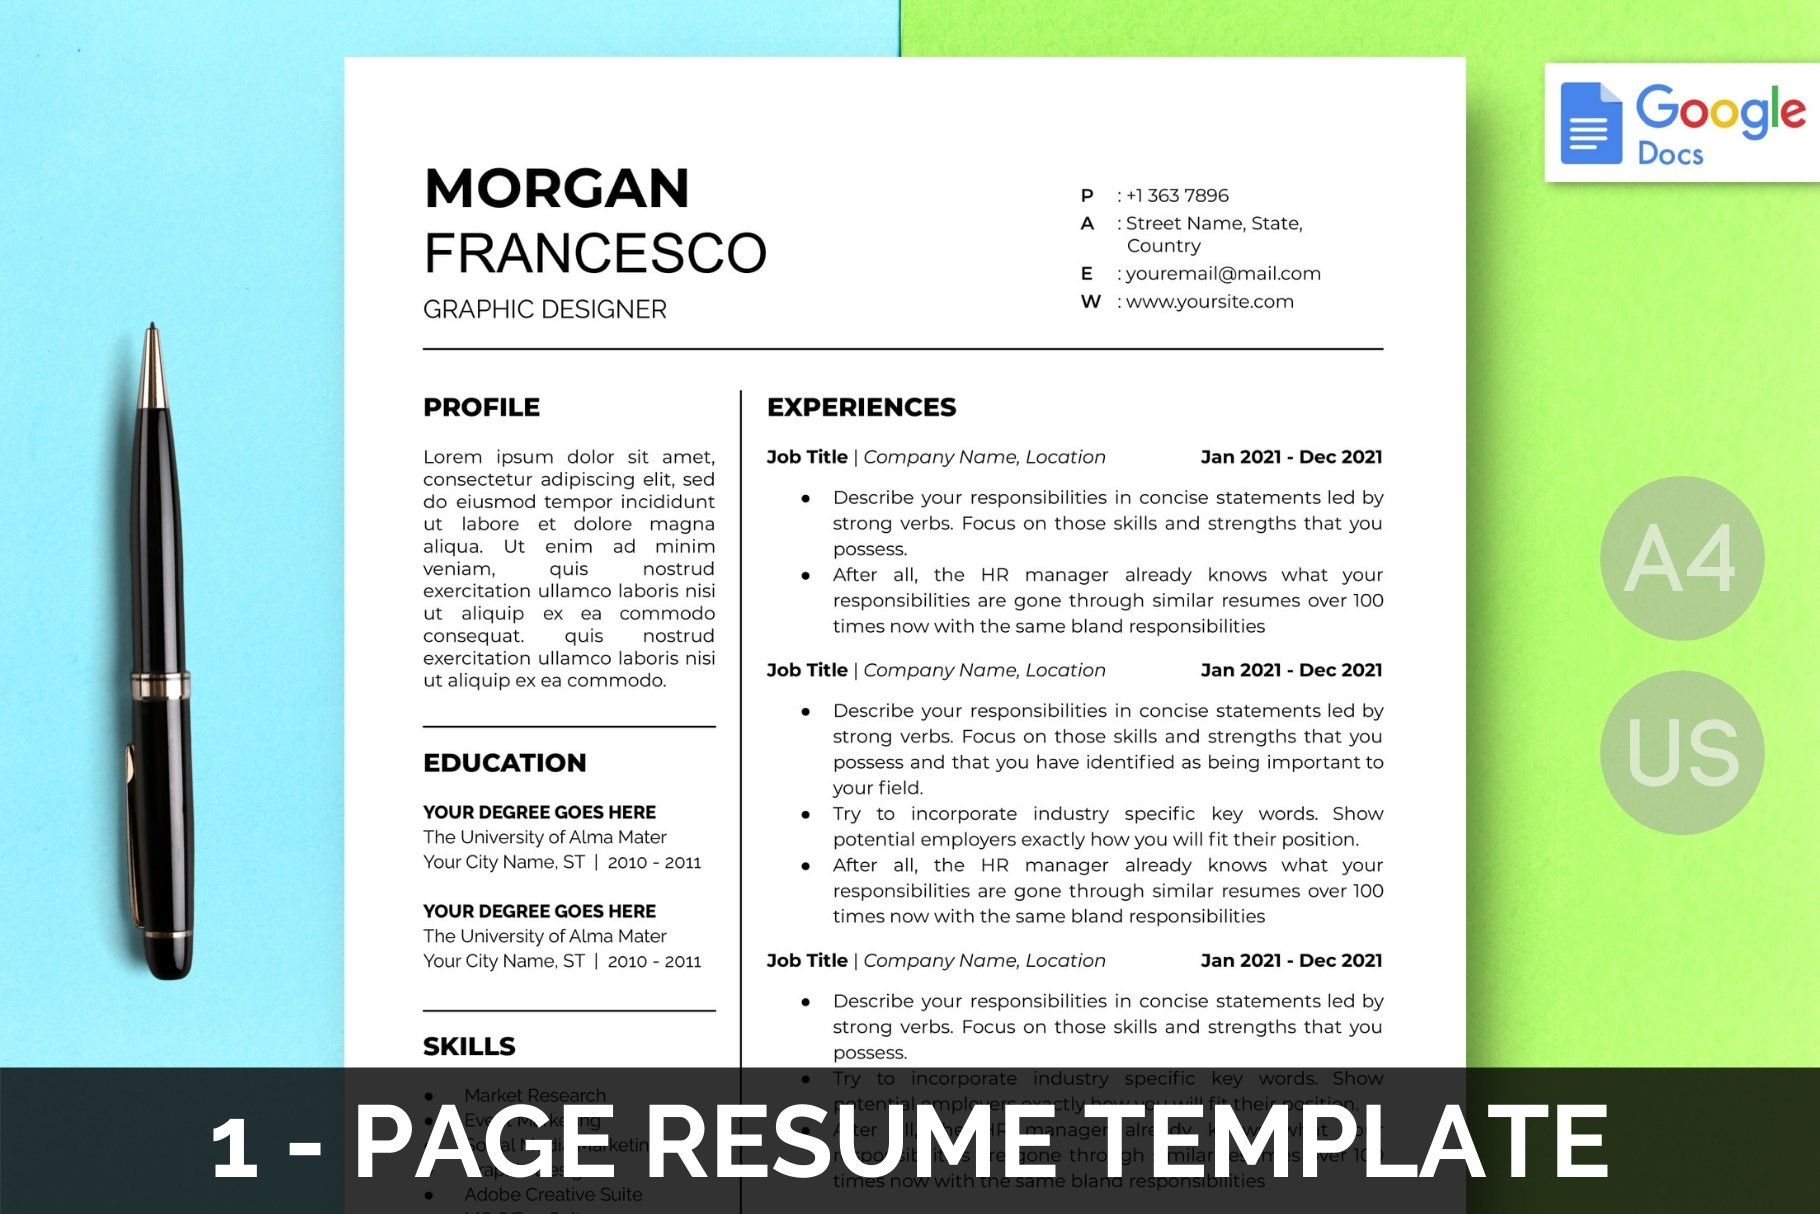 Google Docs Resume Template | 1 Page cover image.